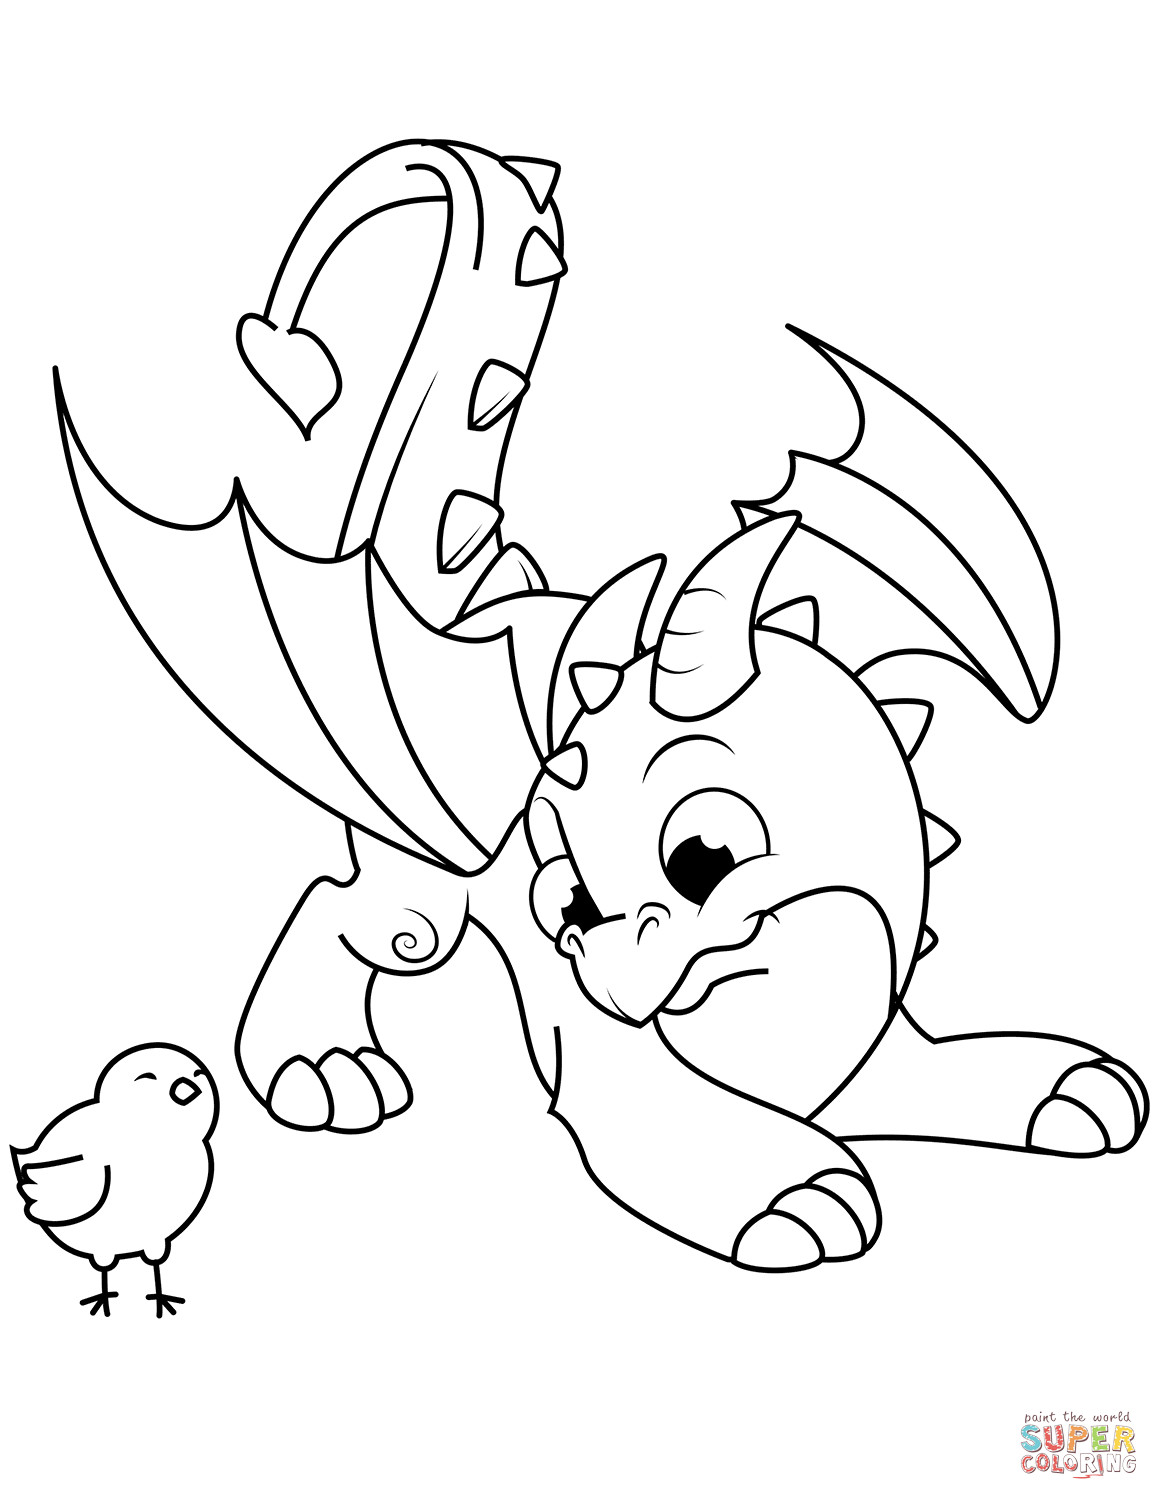 Coloring Pages For Kids Dragon
 Cute Dragon and Chick coloring page